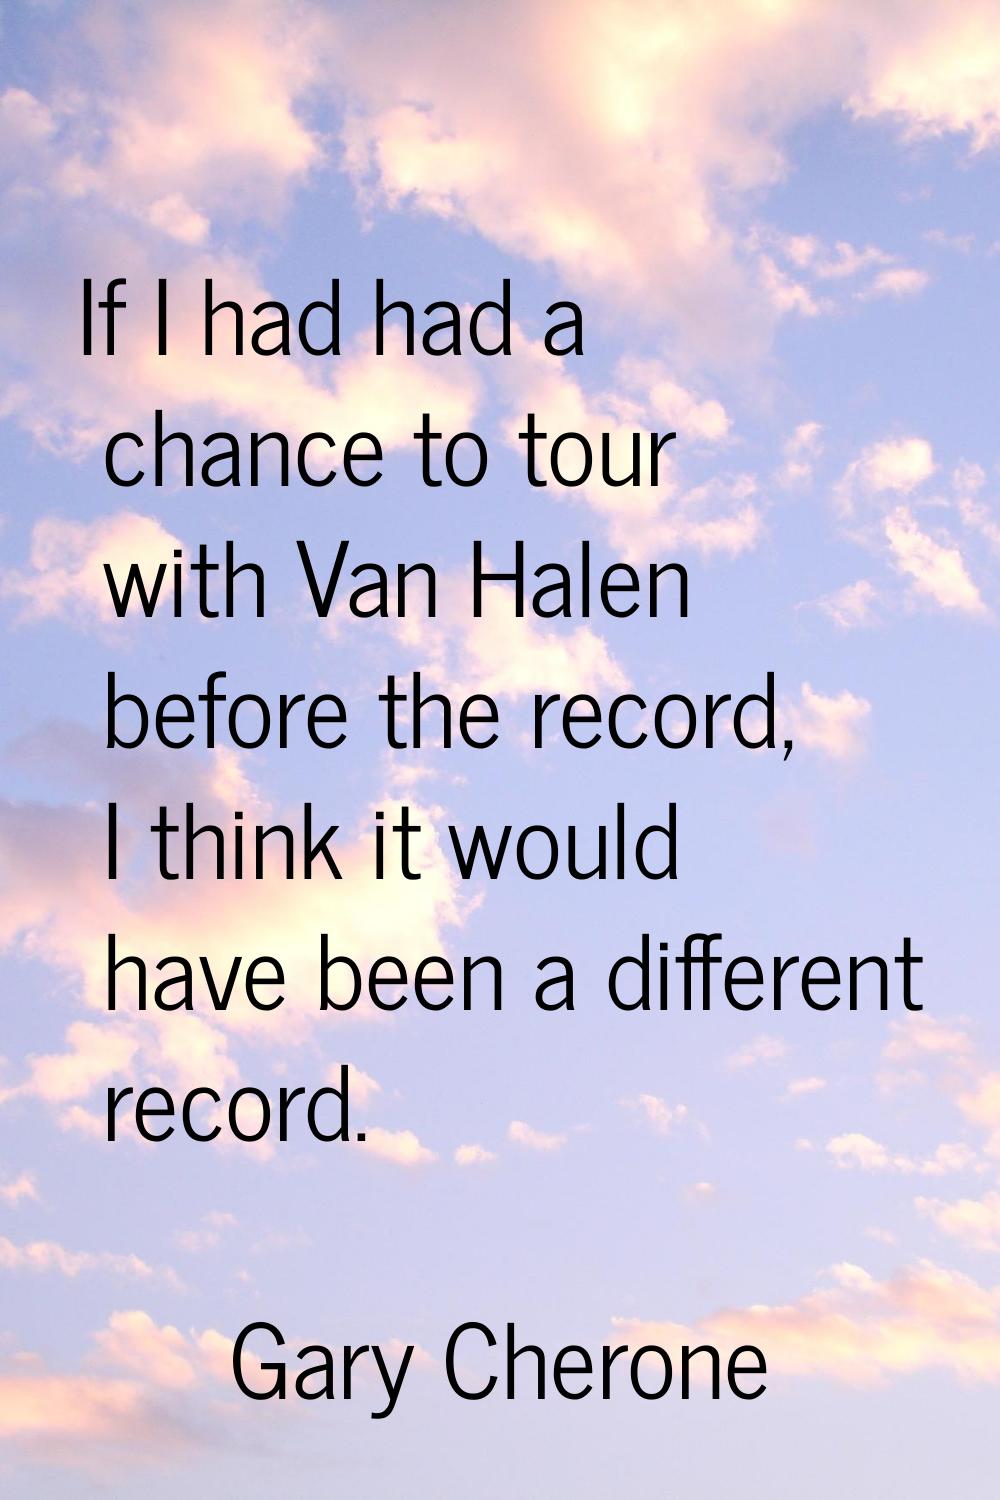 If I had had a chance to tour with Van Halen before the record, I think it would have been a differ